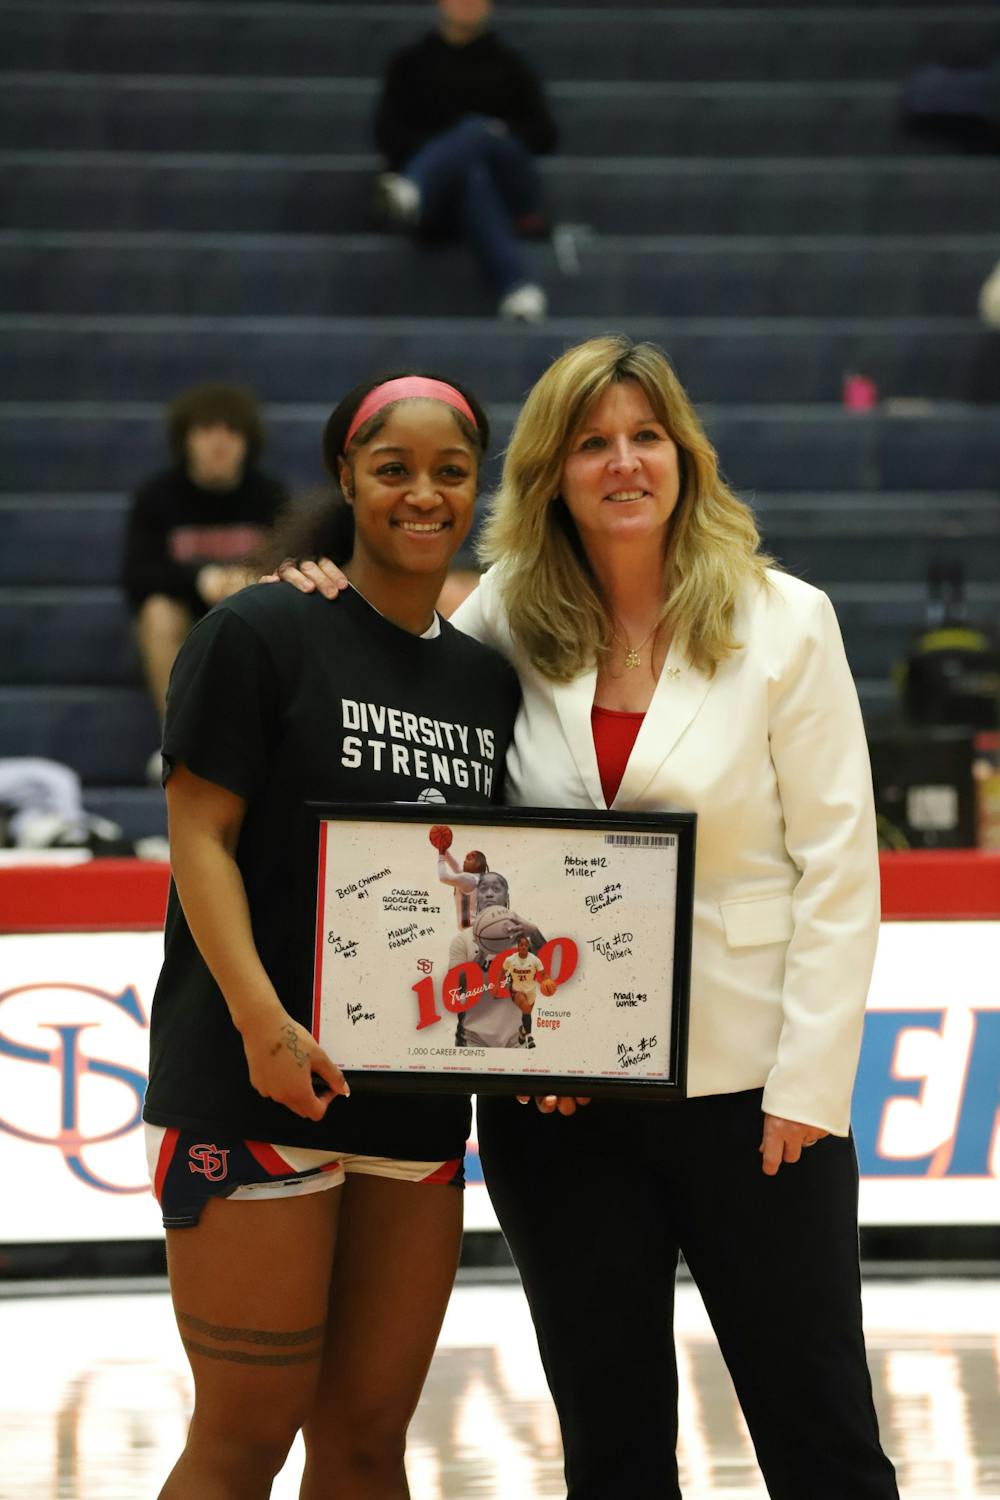 A celebratory night for women’s basketball and Shippensburg University television